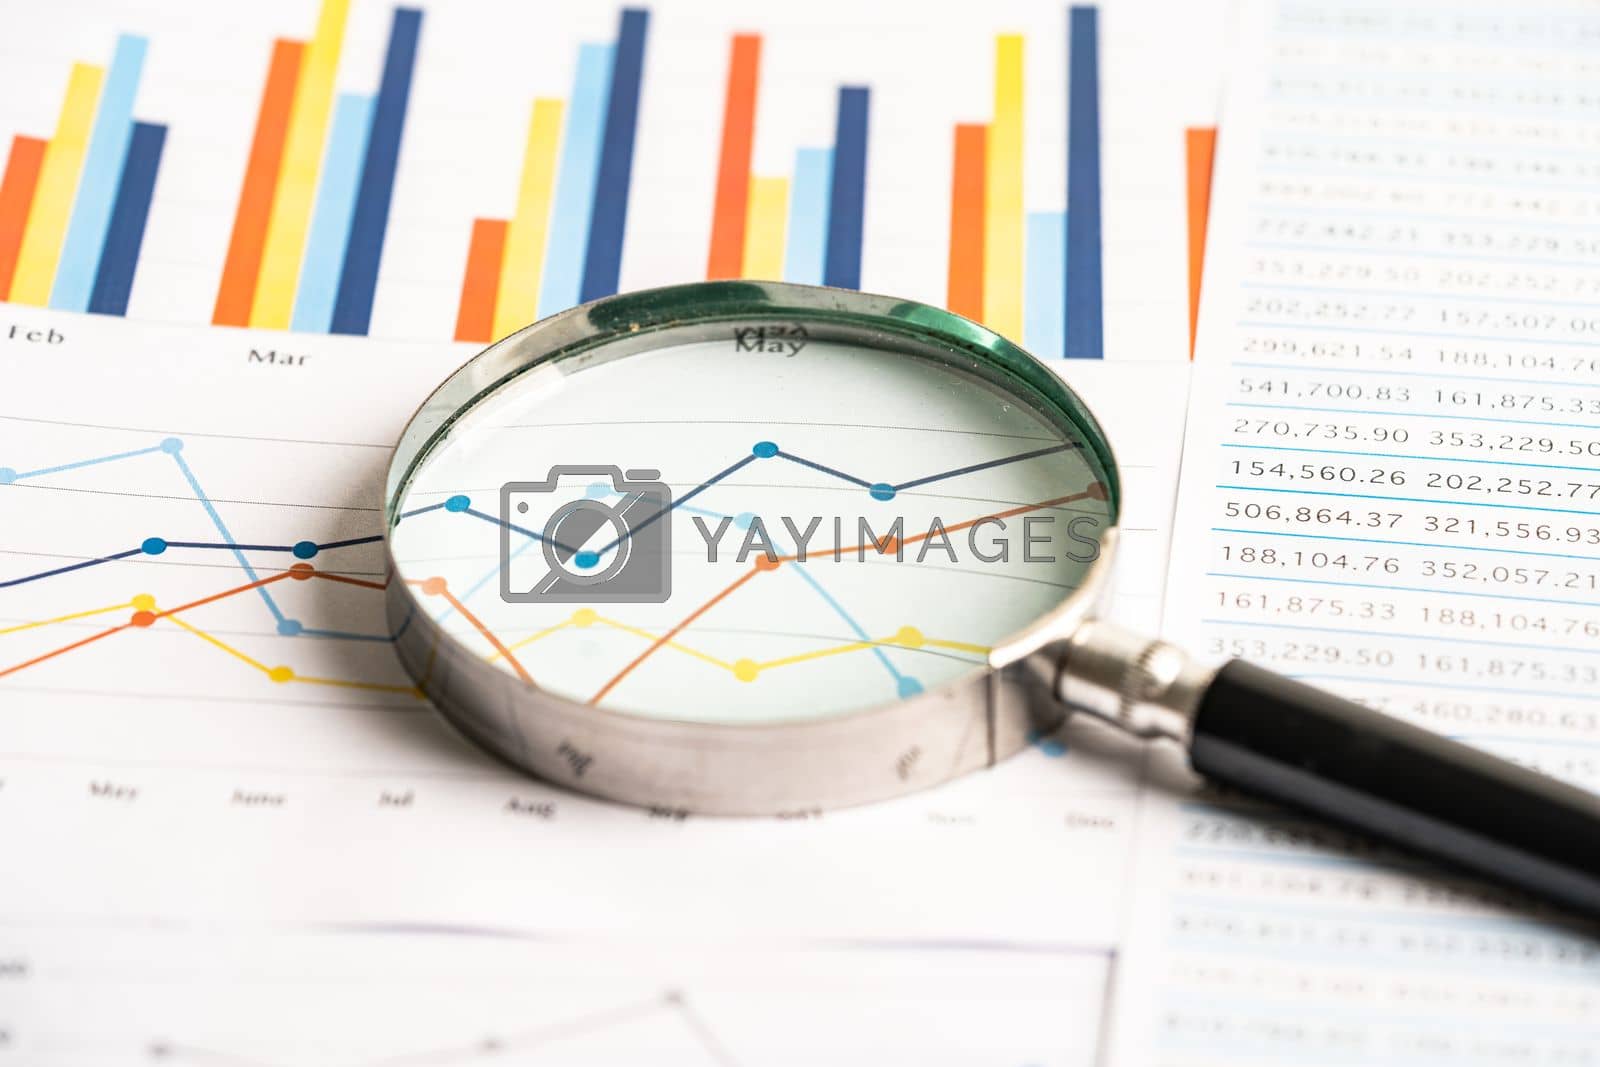 Royalty free image of Magnifying glass on chart graph spreadsheet paper. Financial development, Banking Account, Statistics, economy, Stock exchange trading, Business office company meeting concept. by pamai